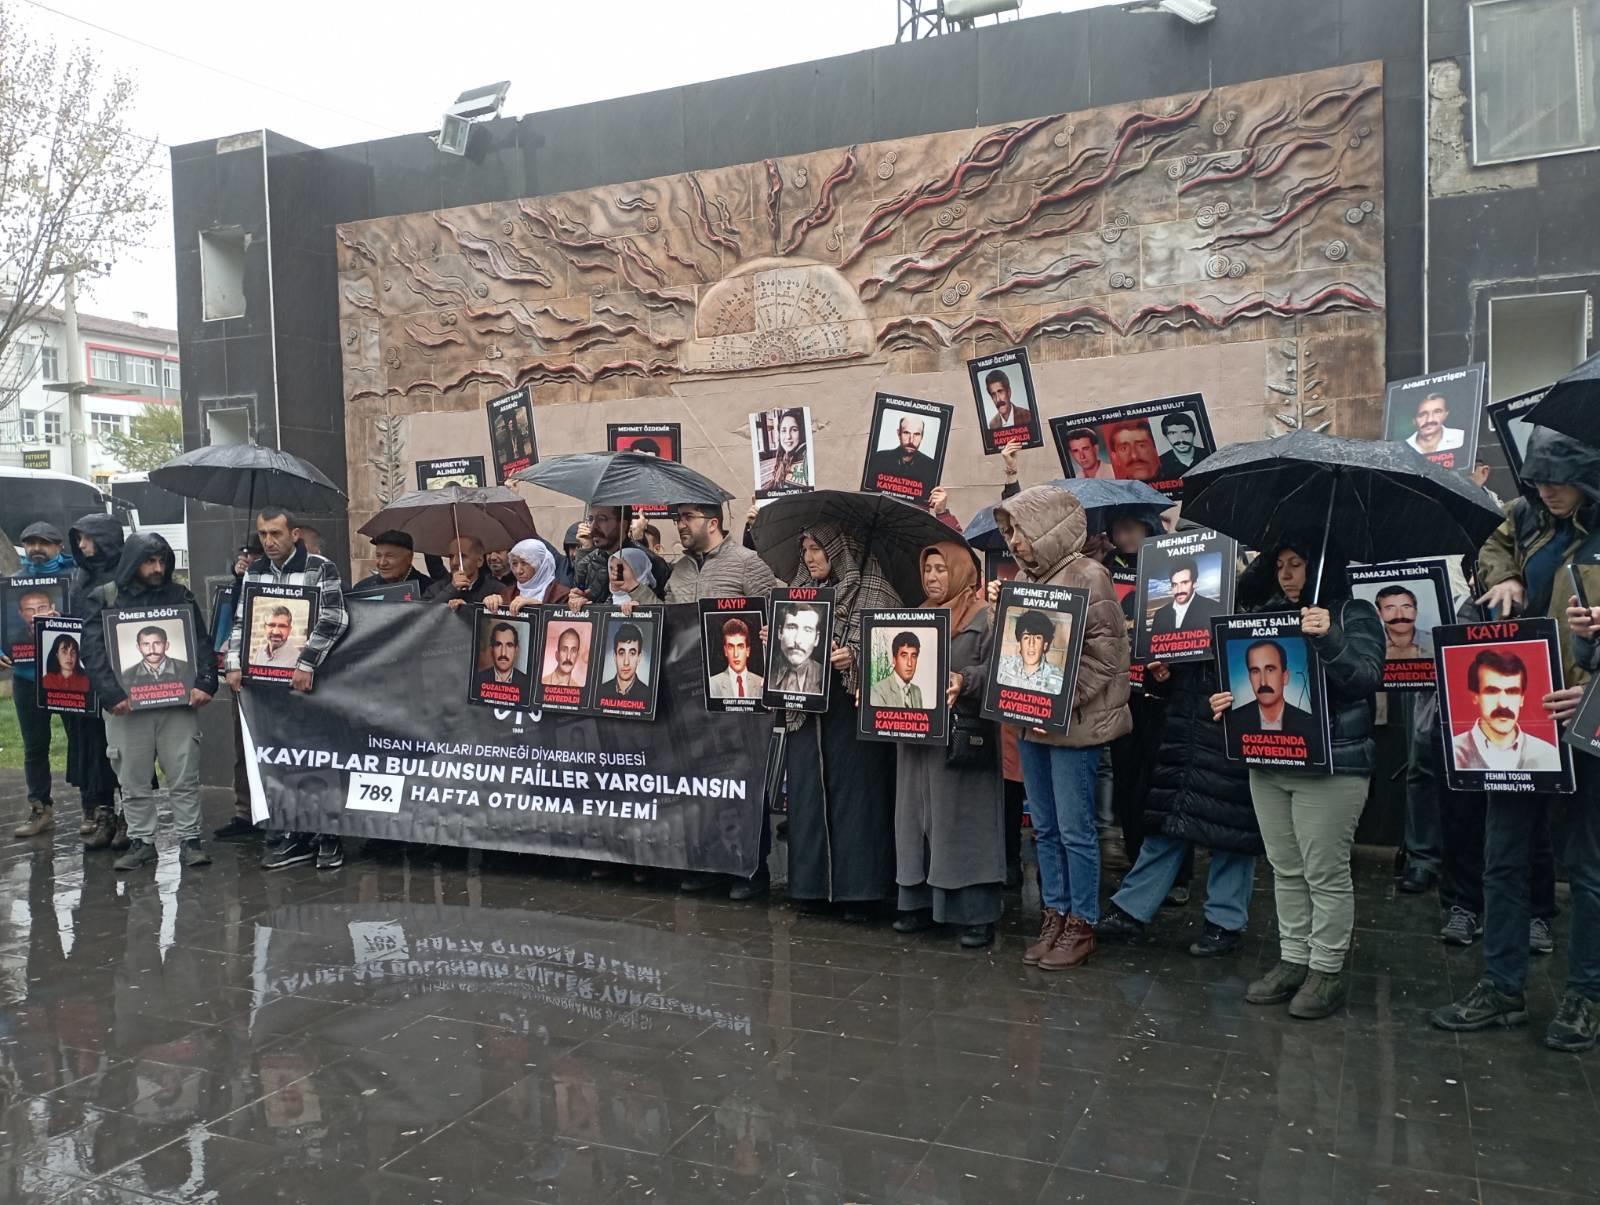 Protest for justice for disappeared people in Turkey